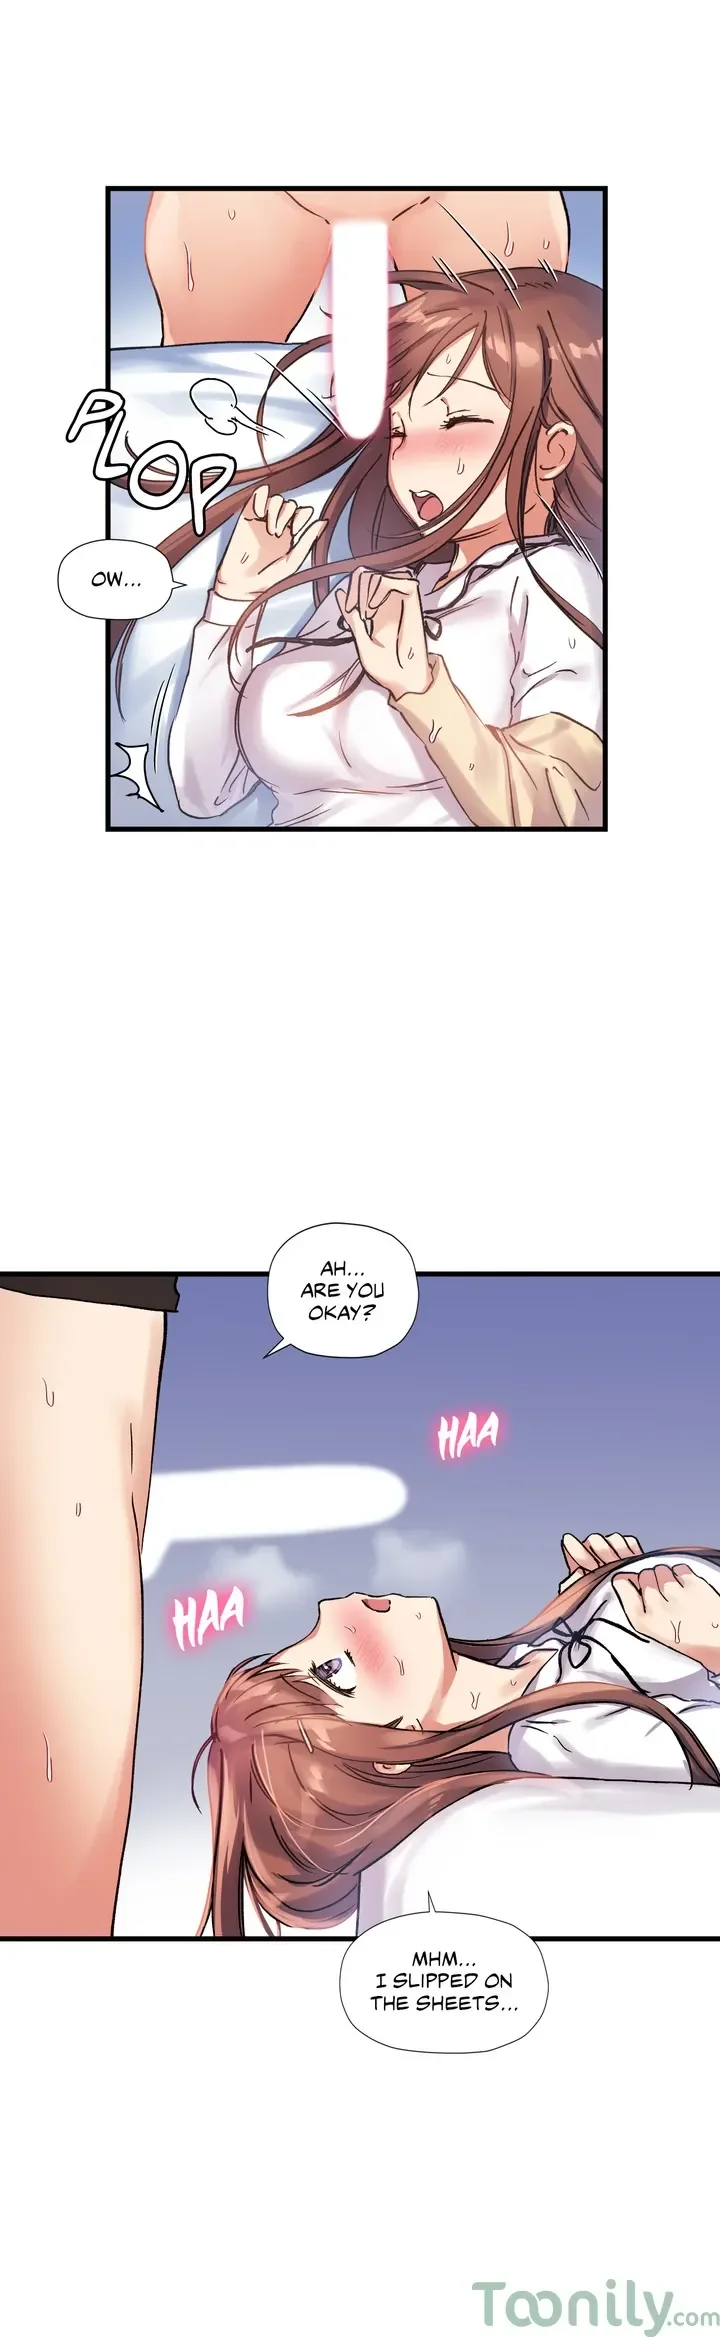 under-observation-my-first-loves-and-i-chap-34-5